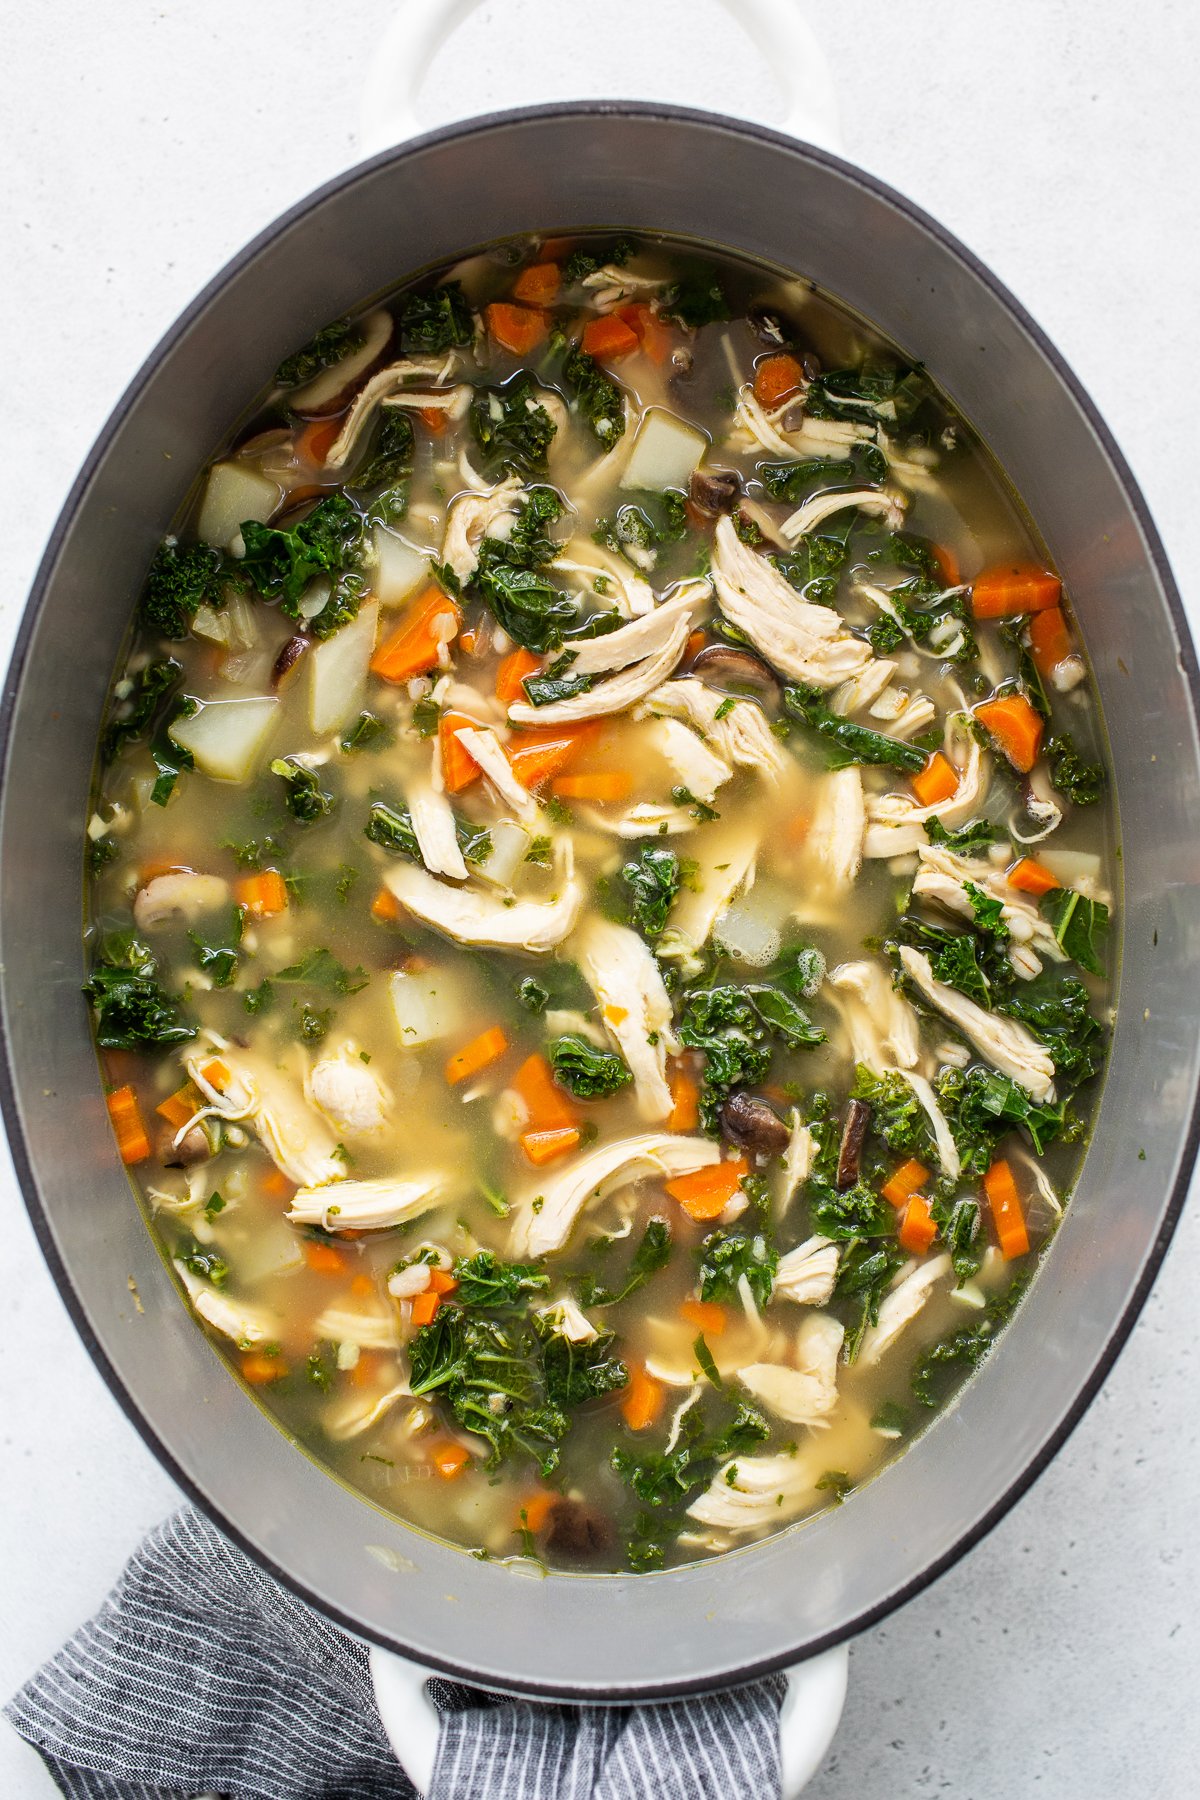 Chicken soup with shredded chicken and kale added in. 